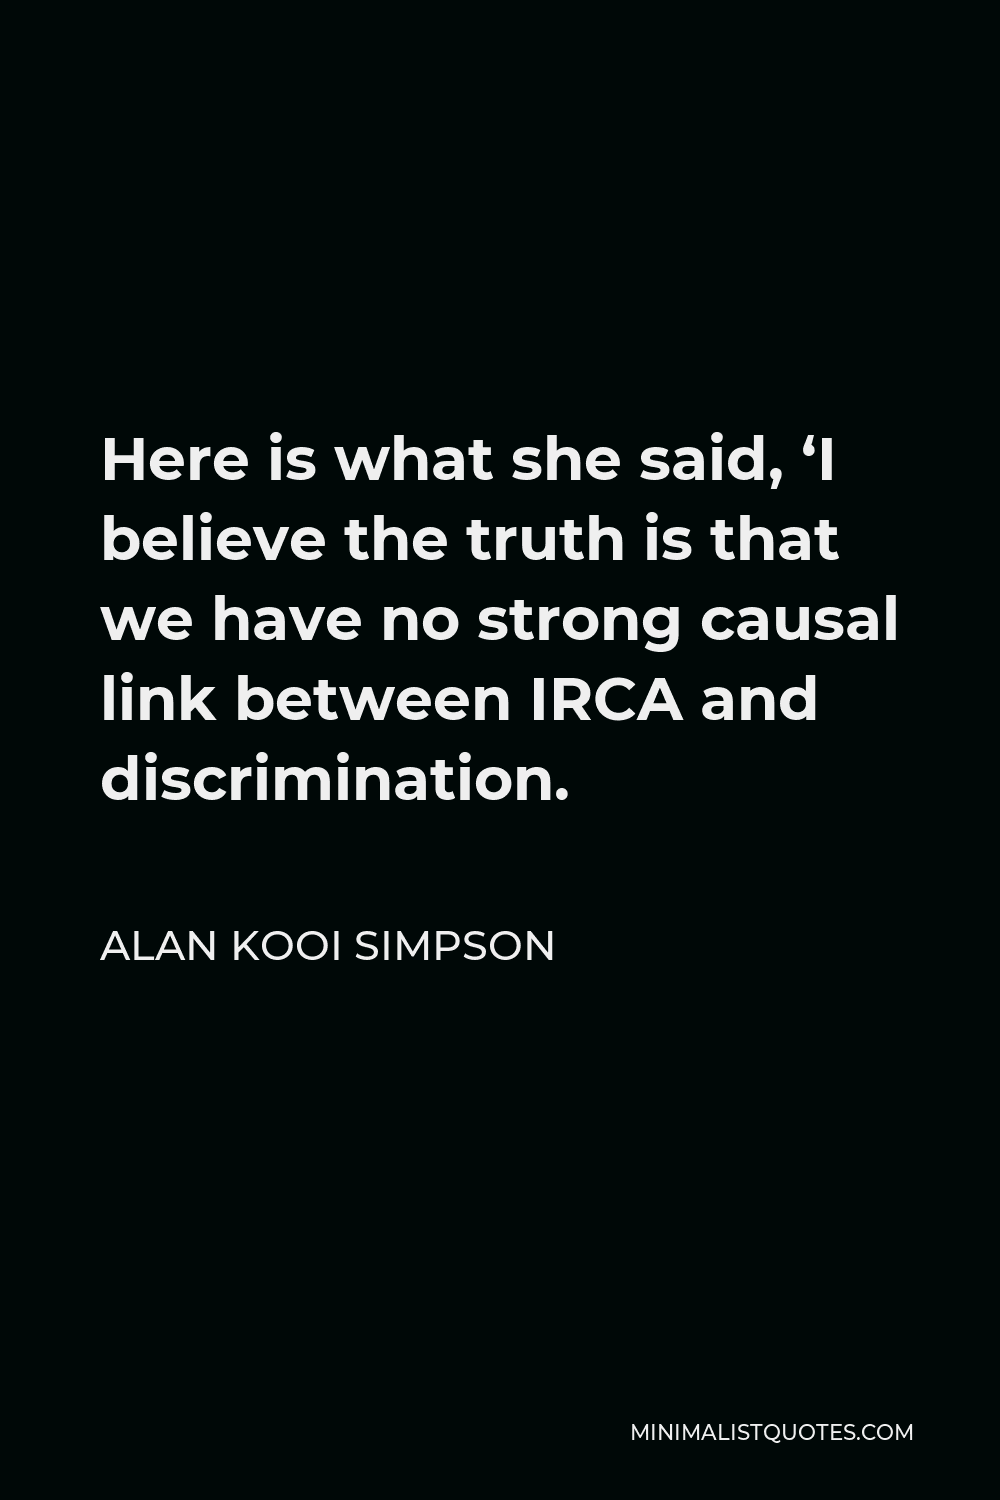 Alan Kooi Simpson Quote - Here is what she said, ‘I believe the truth is that we have no strong causal link between IRCA and discrimination.